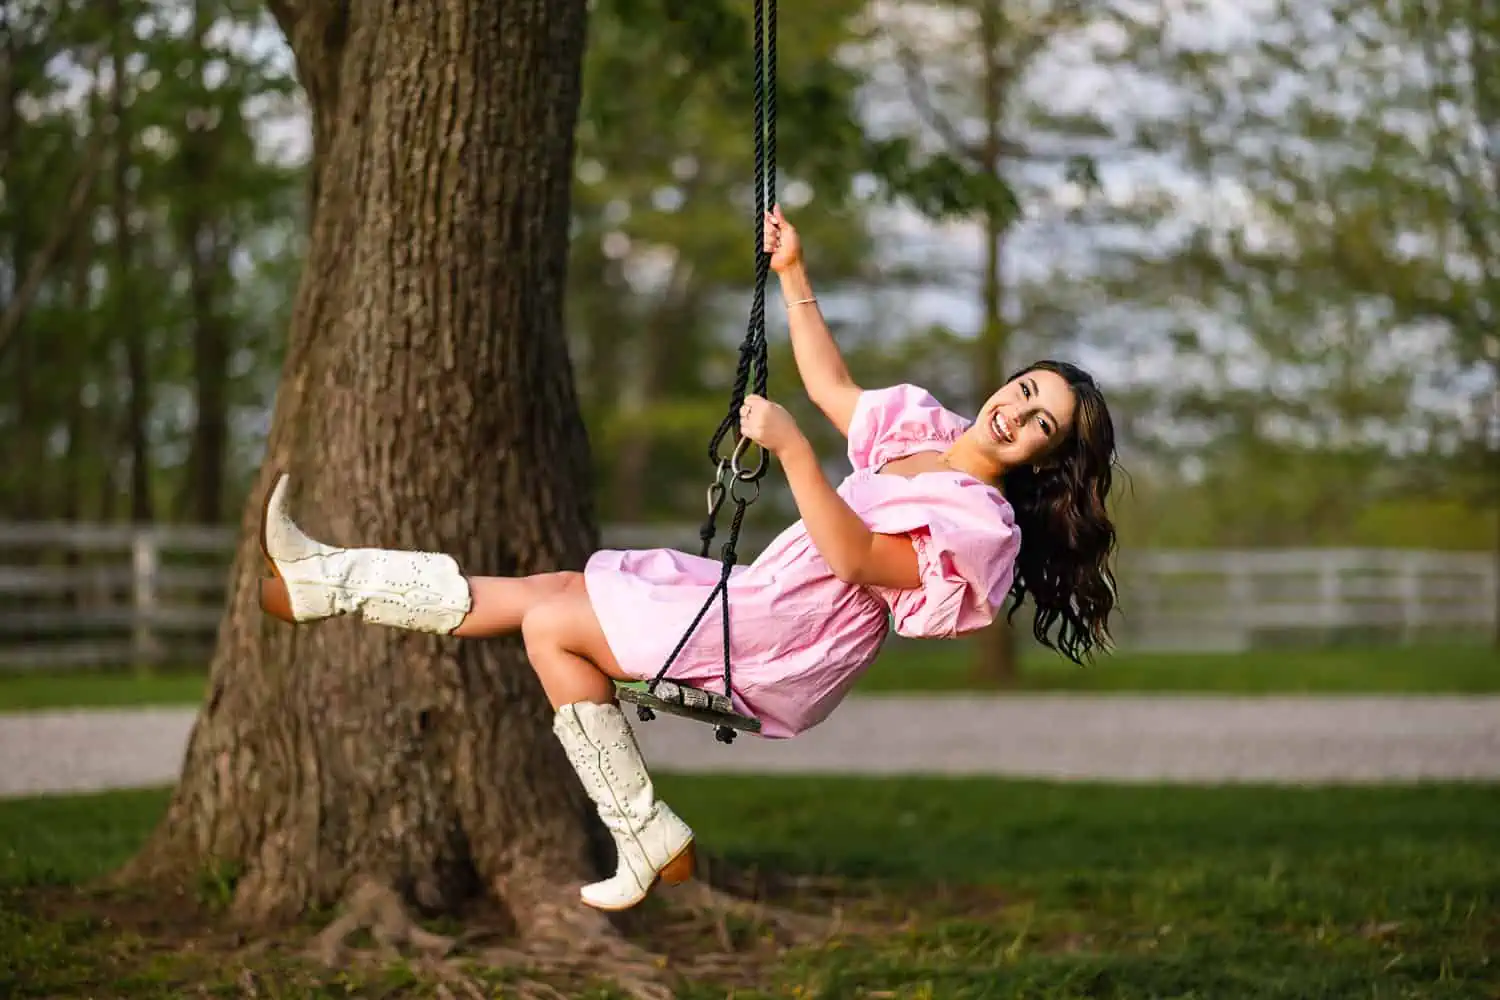 A Lexington senior photographer captures a girl in a pink dress swinging on a tree.